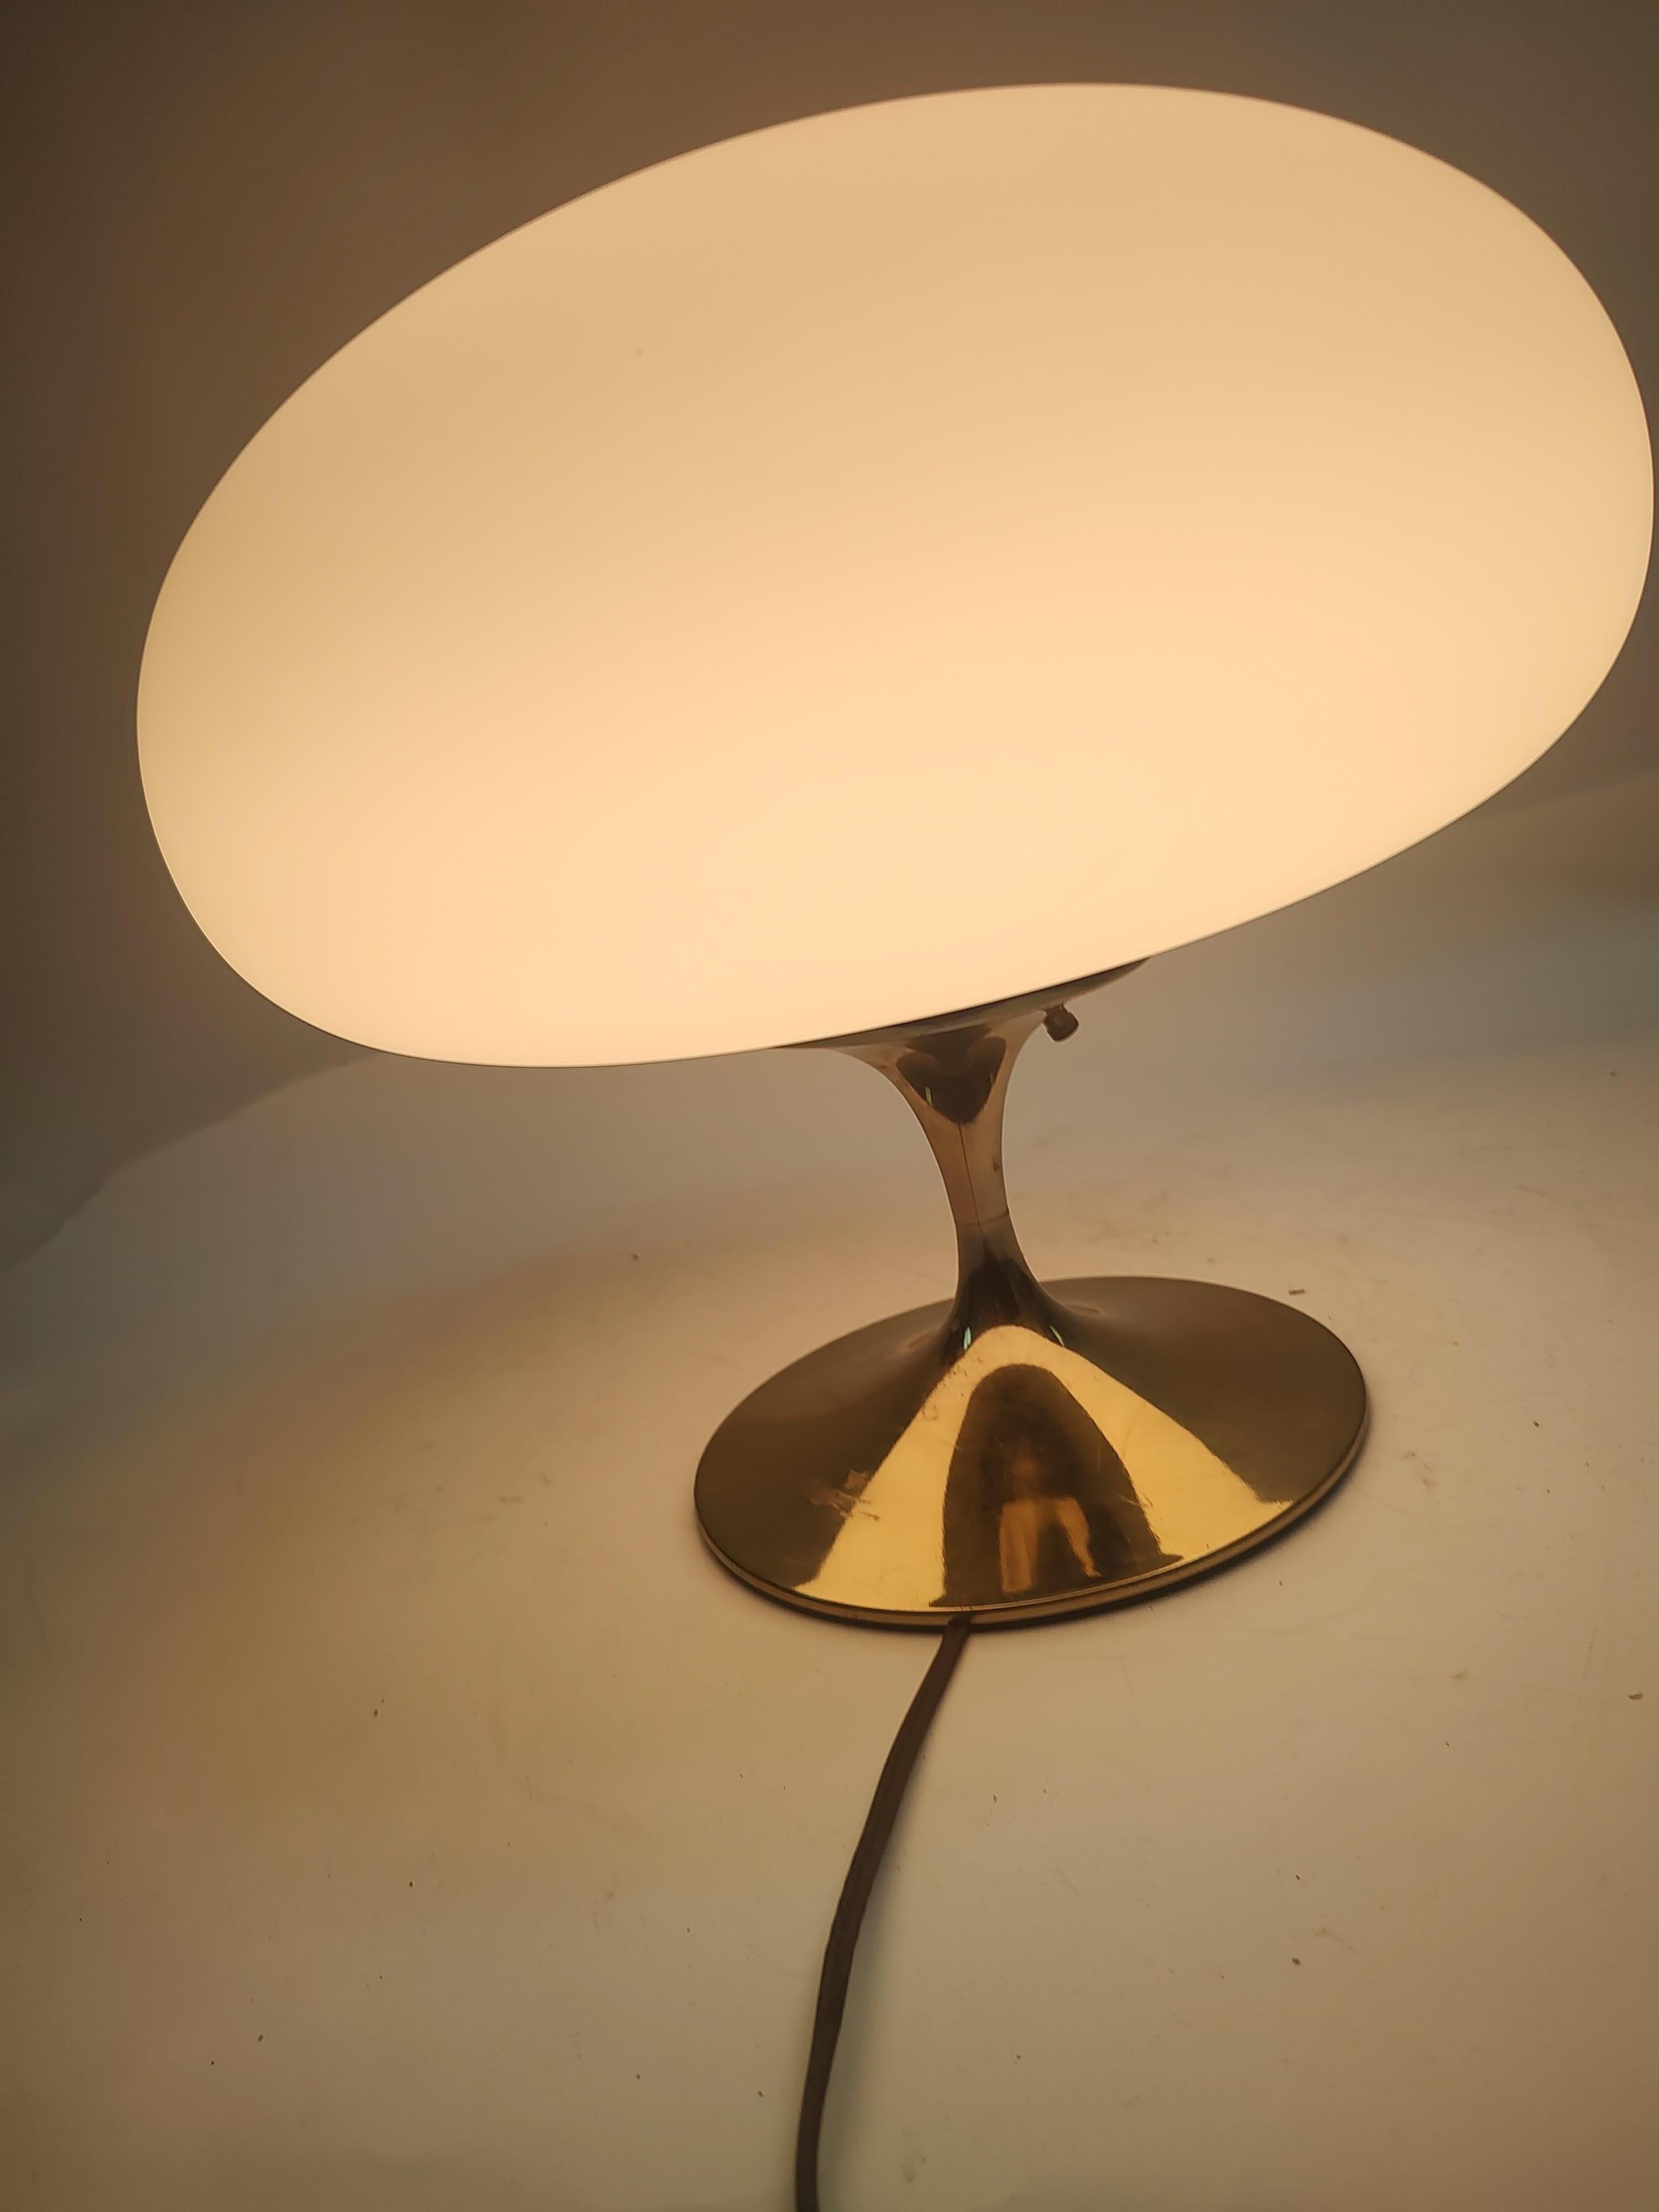 Brass Mid Century Modern Sculptural Mushroom Table Lamp Attributed to Laurel Lamp Co.